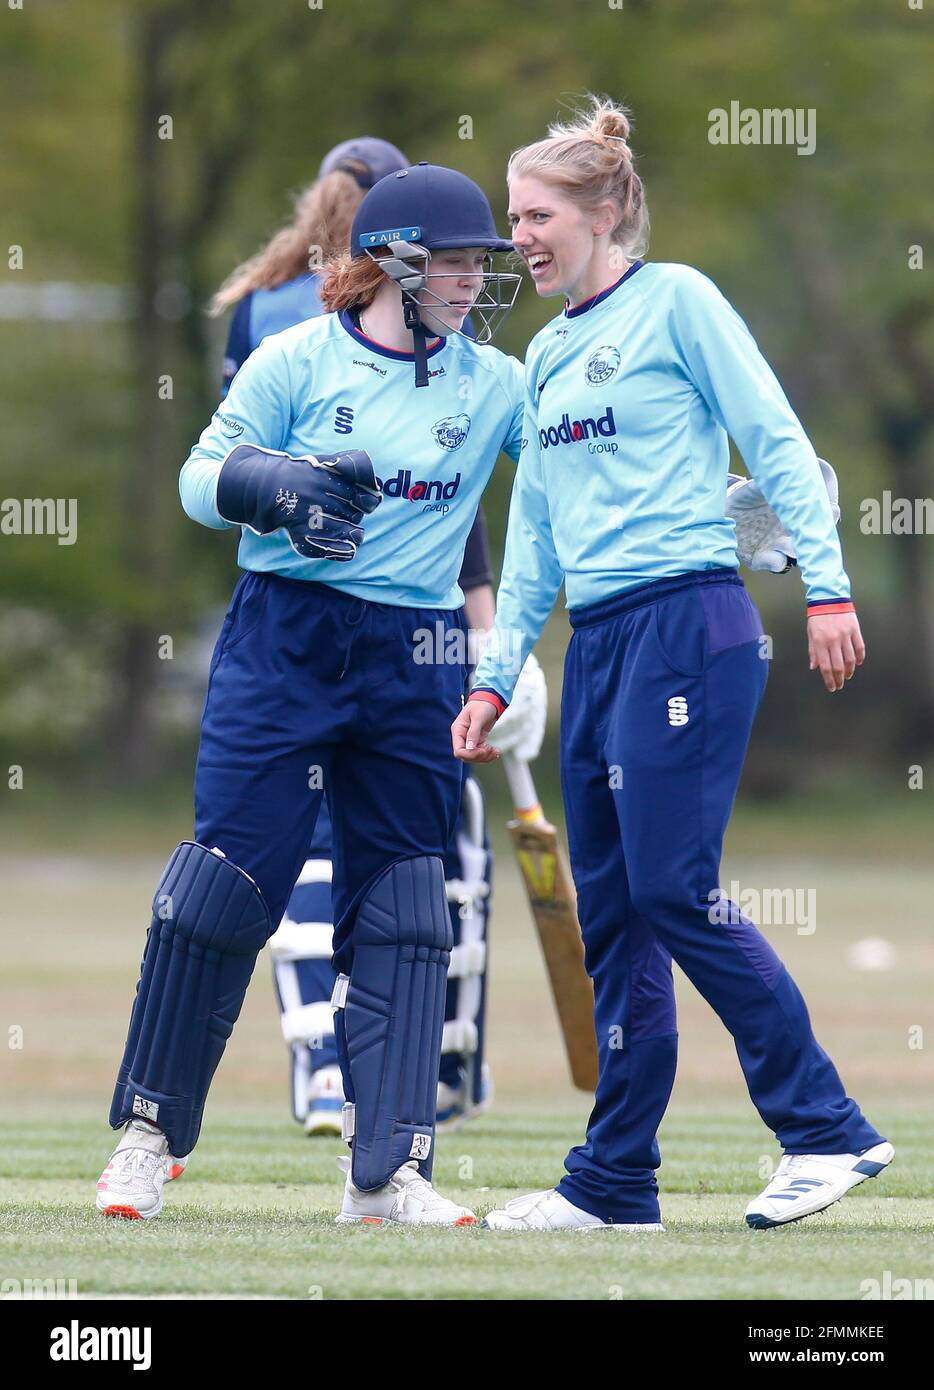 CHIGWELL, United Kingdom, MAY 01: Kelly Castle of Essex Women during Women London Championship between Essex CCC and Kent CCC at Chigwell School, Chig Stock Photo